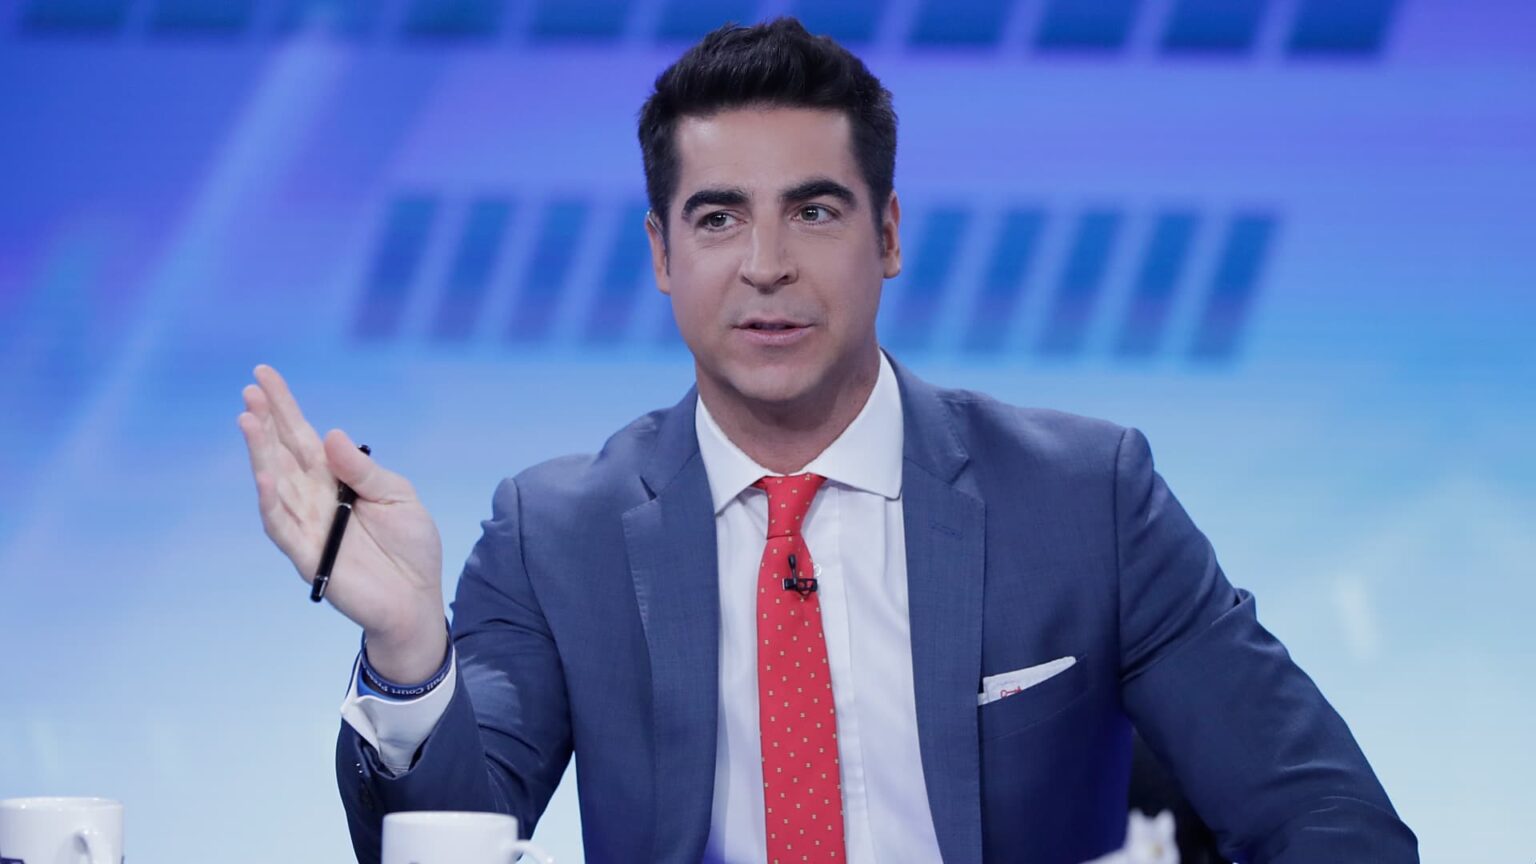 Fox News selects Jesse Watters to replace Tucker Carlson